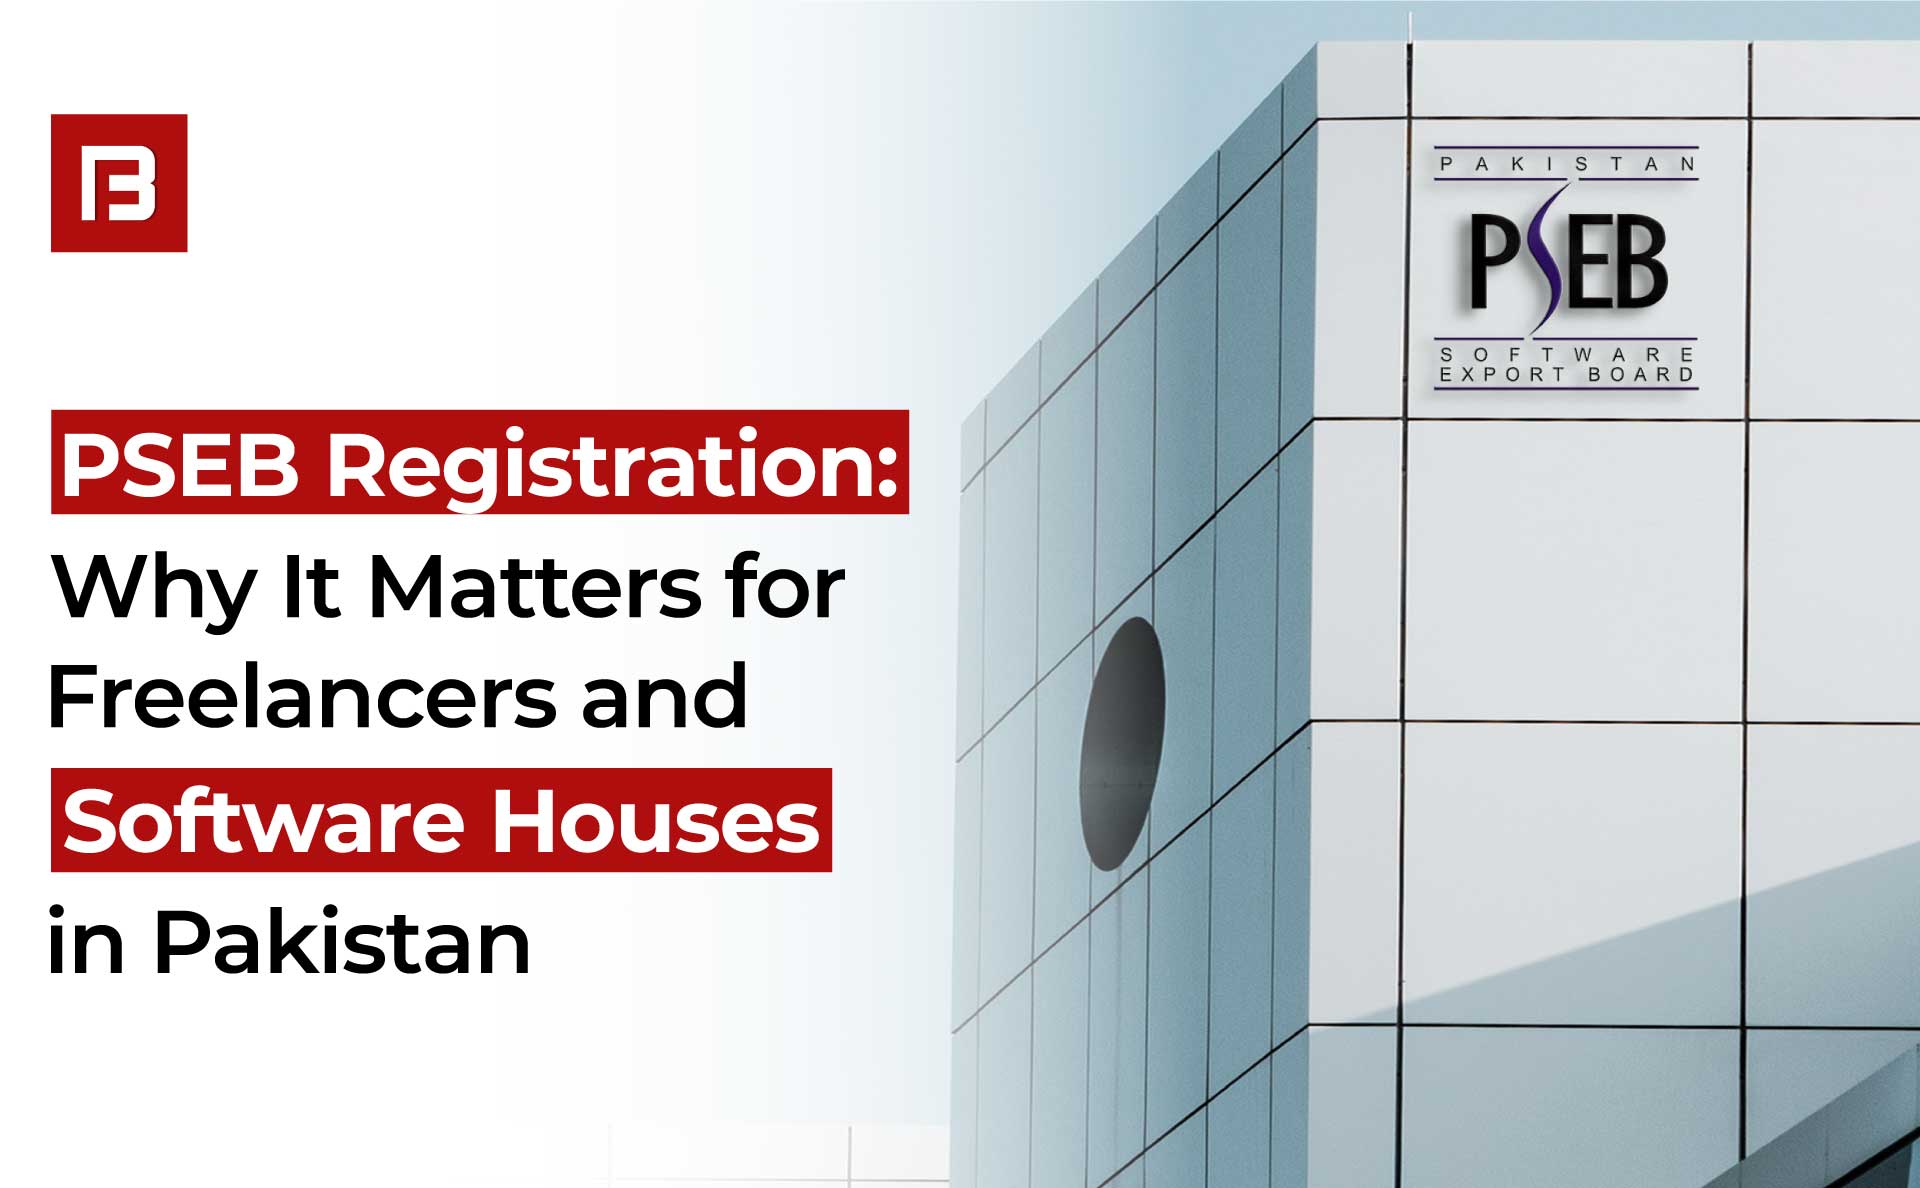 PSEB Registration: Benefits for Freelancers and Software Houses in Pakistan